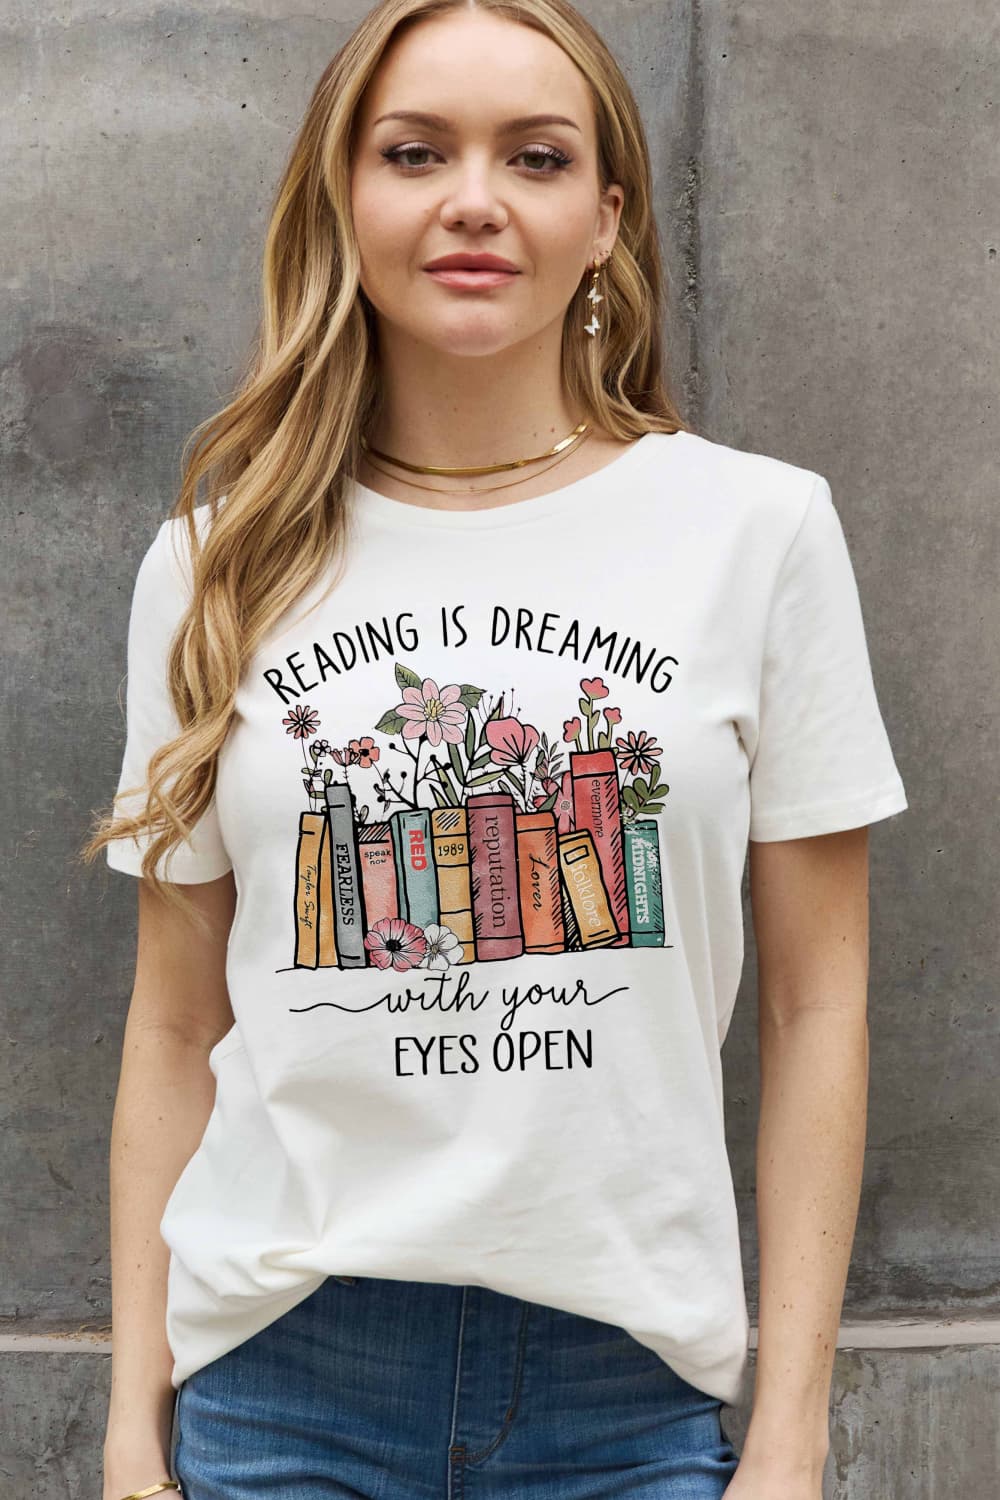 Slate Gray Simply Love Simply Love Full Size READING IS DREAMING WITH YOUR EYES OPEN Graphic Cotton Tee